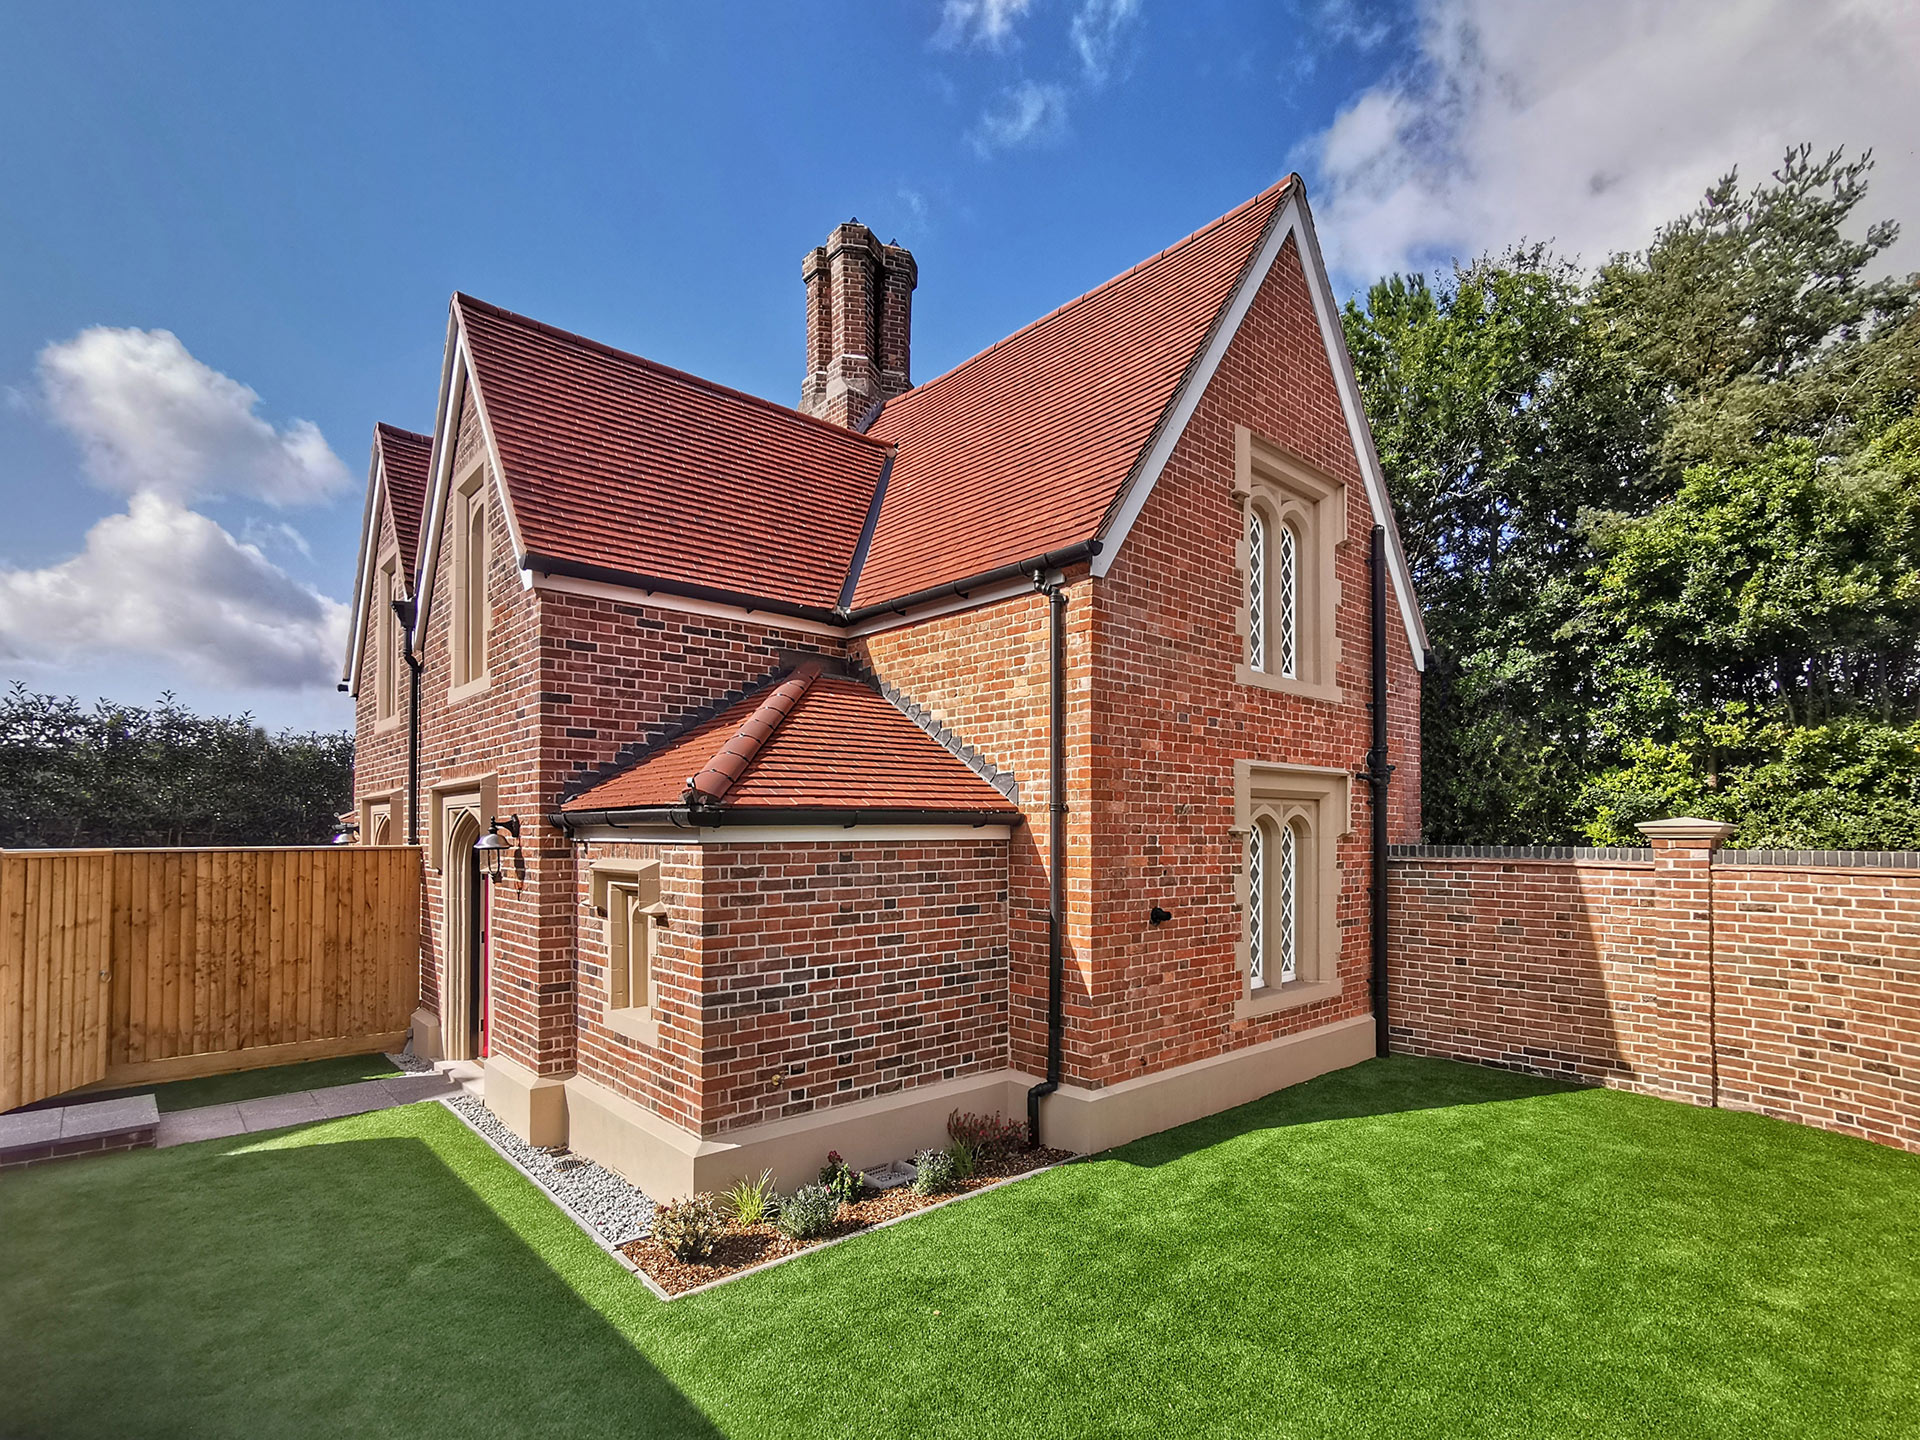 side view of red brick house with enclosed lawn garden